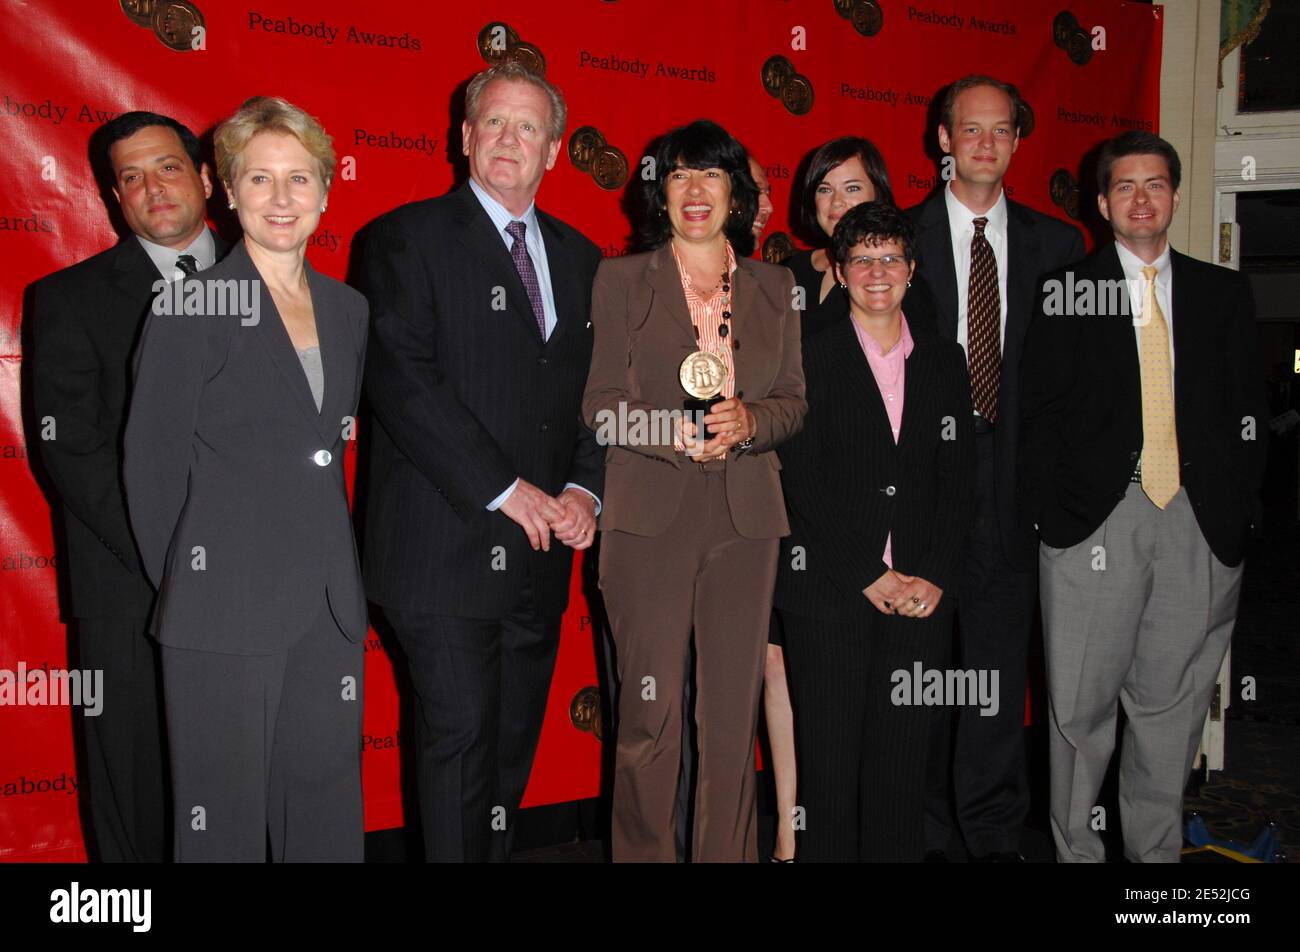 CNN correspondent Christiane Amanpour (C) and production team attend the 67th Annual George Foster Peabody Awards at the Waldorf Astoria in New York City, USA on June 16, 2008. Photo by Gregorio Binuya/ABACAUSA.COM (Pictured : Christiane Amanpour) Stock Photo